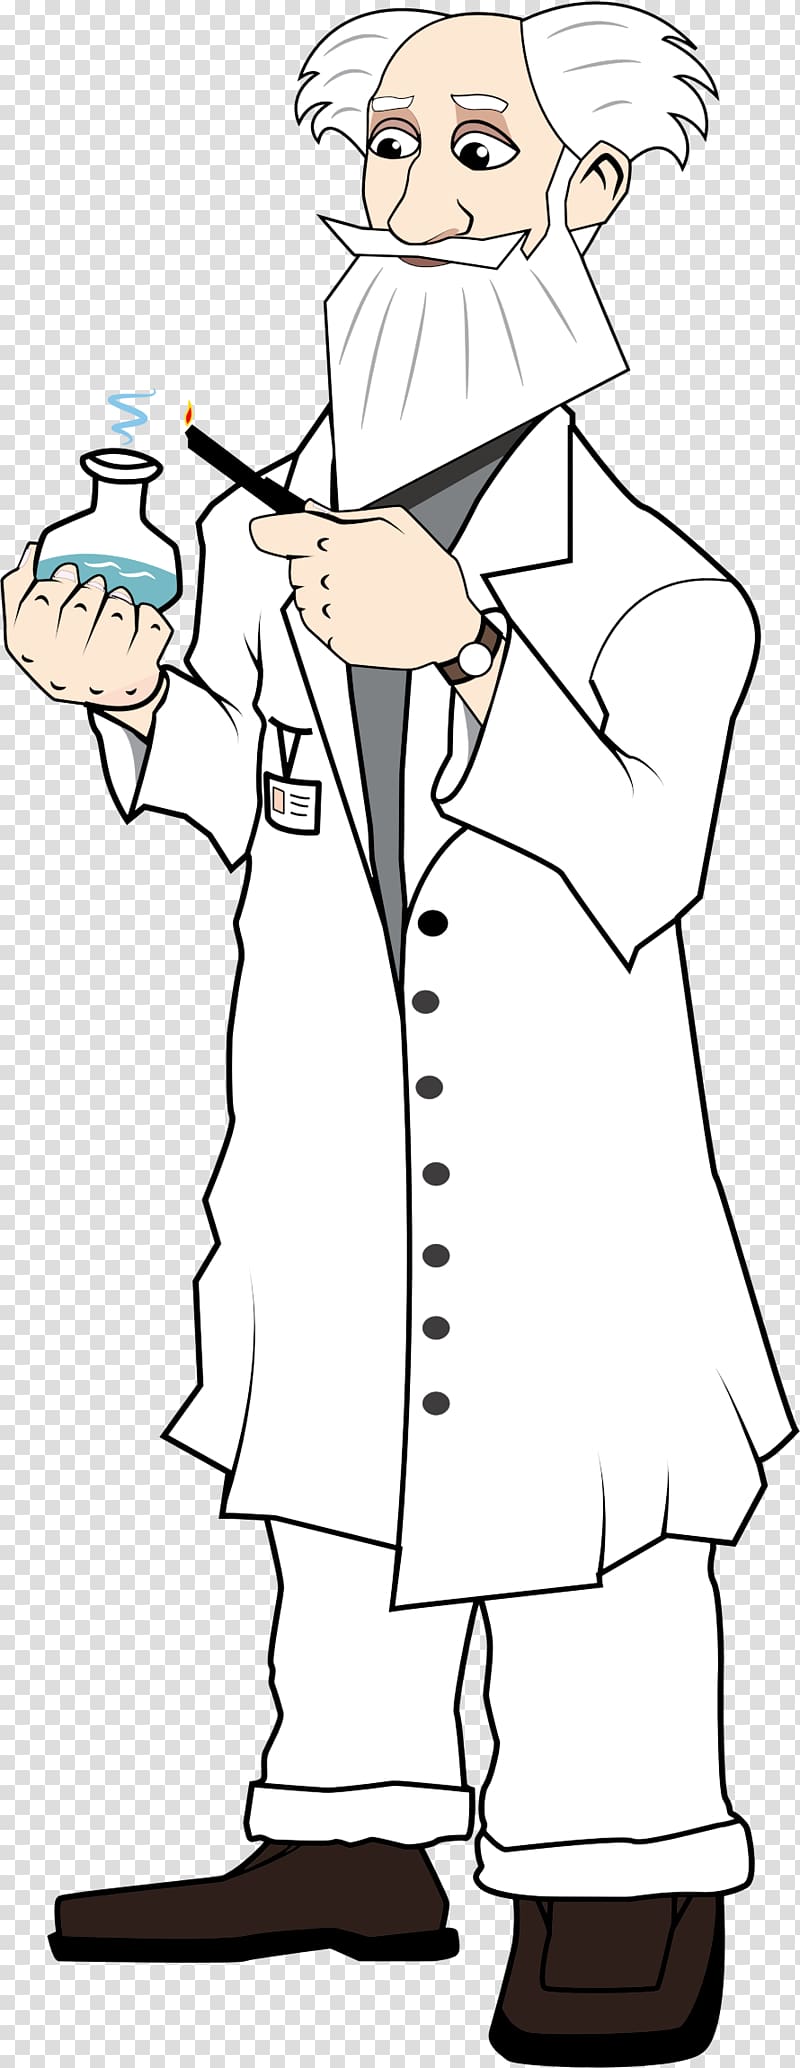 Drawing Character Line art , scientists do experiments transparent background PNG clipart